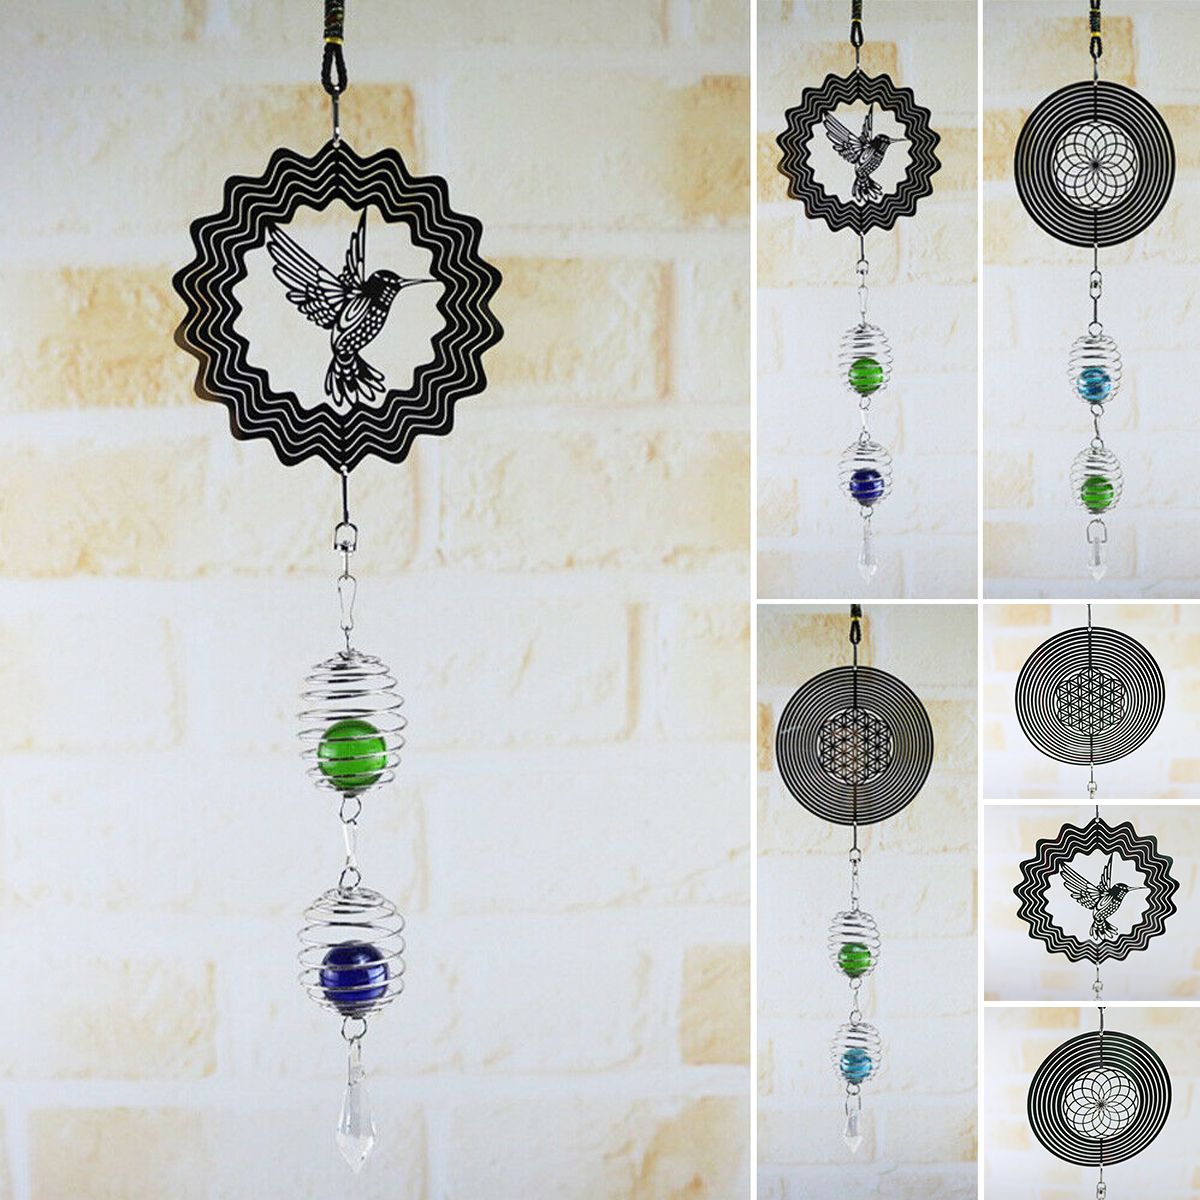 Home-Wind-Chime-Hanging-Ornament-Spinner-Spiral-Rotating-Crystal-Ball-Yard-Decor-1682681